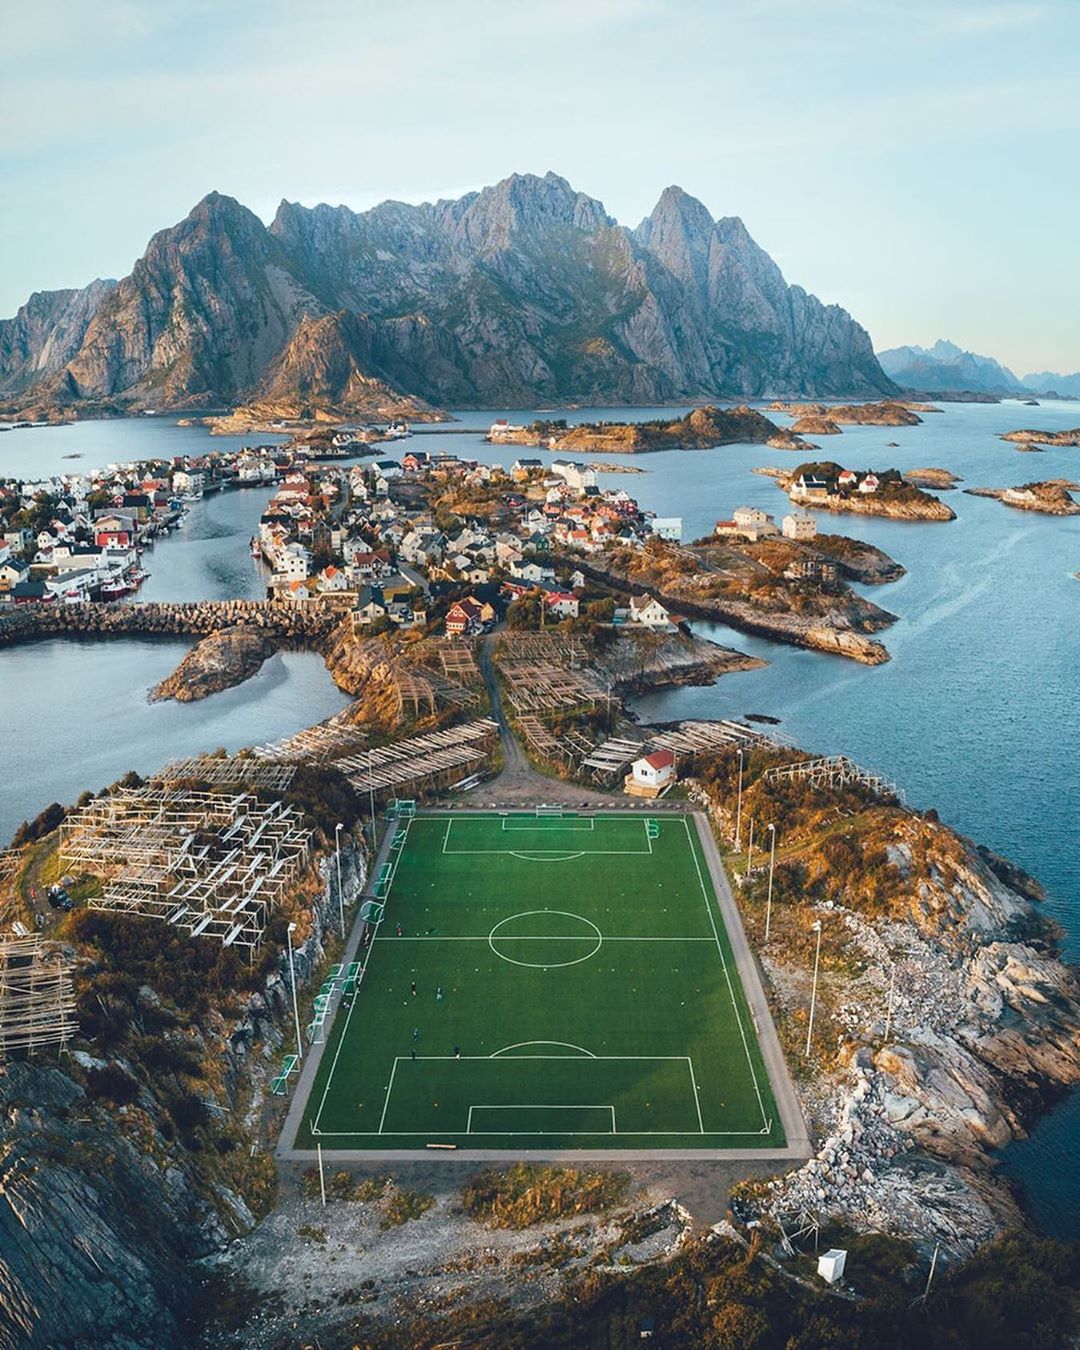 #HelloFrom Lofoten Islands, Norway. “This village is home to just 510 people, most of them fishermen,” says photographer Lennart Pagel (@lennart). “Instead of bleachers, the football [soccer] field is surrounded by wooden racks to dry fish.” ⁣
⁣
Photo by @lennart